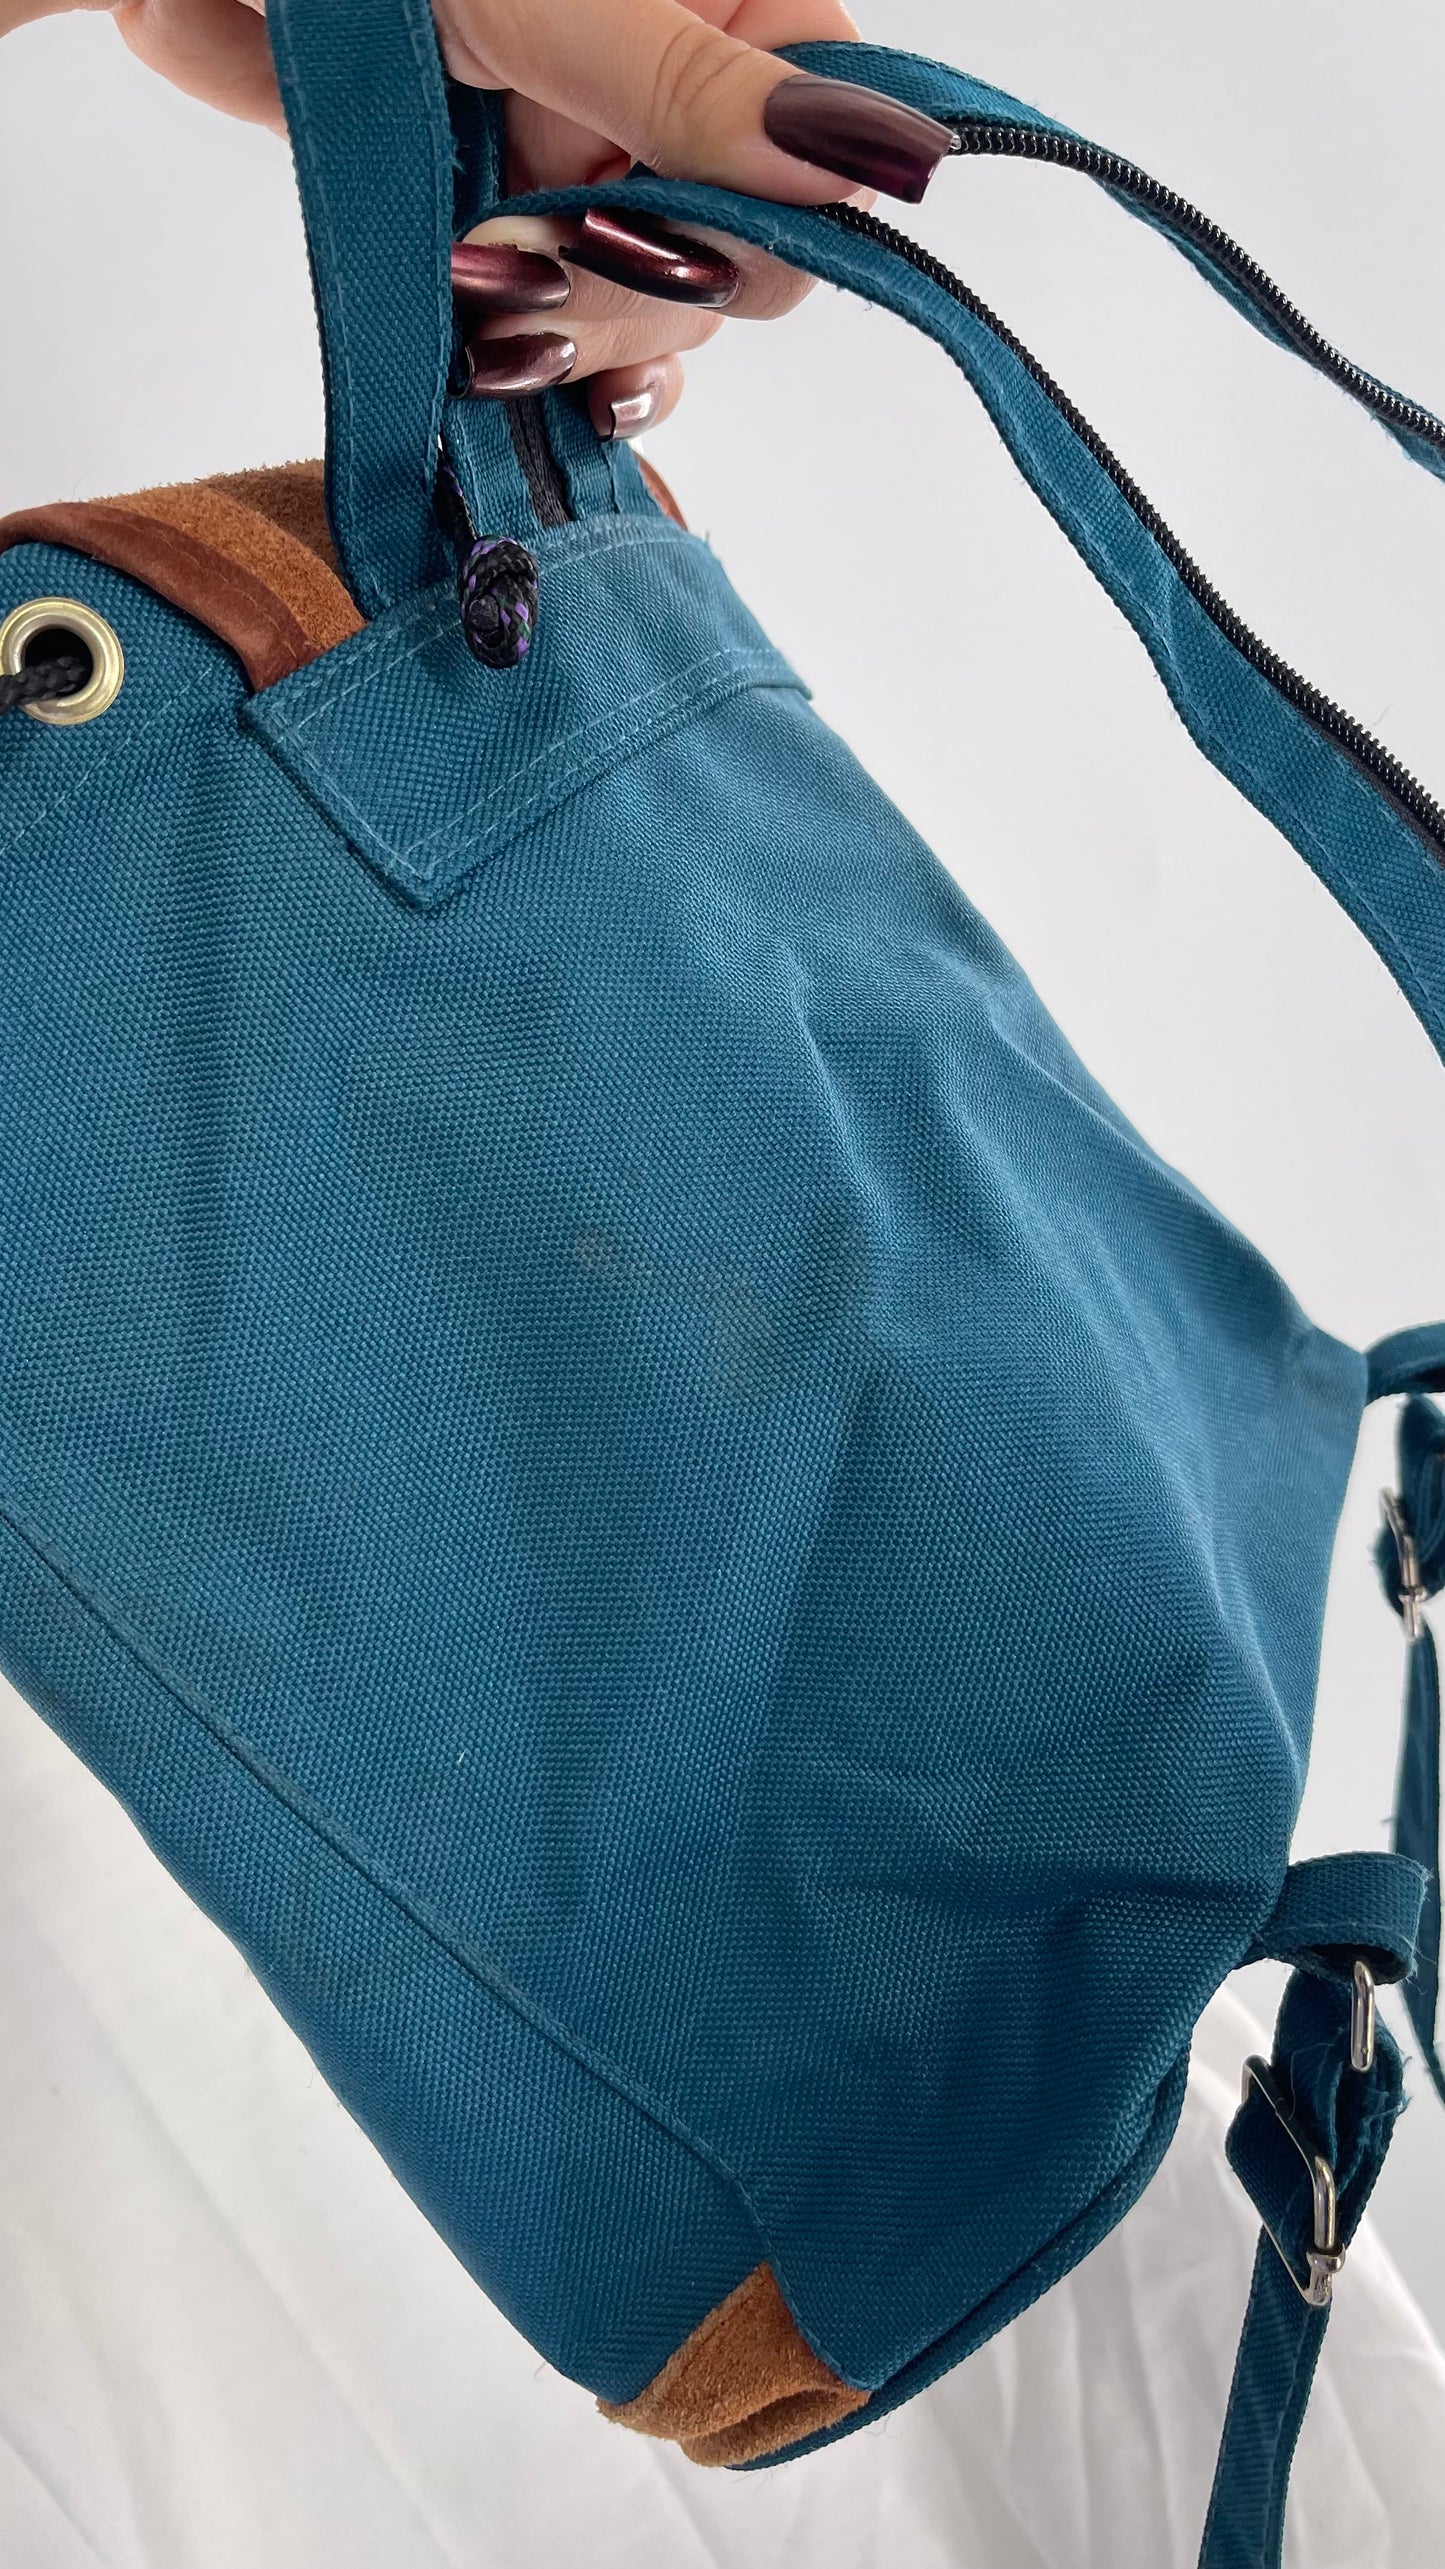 Vintage 90s Canvas Backpack with Leather Details